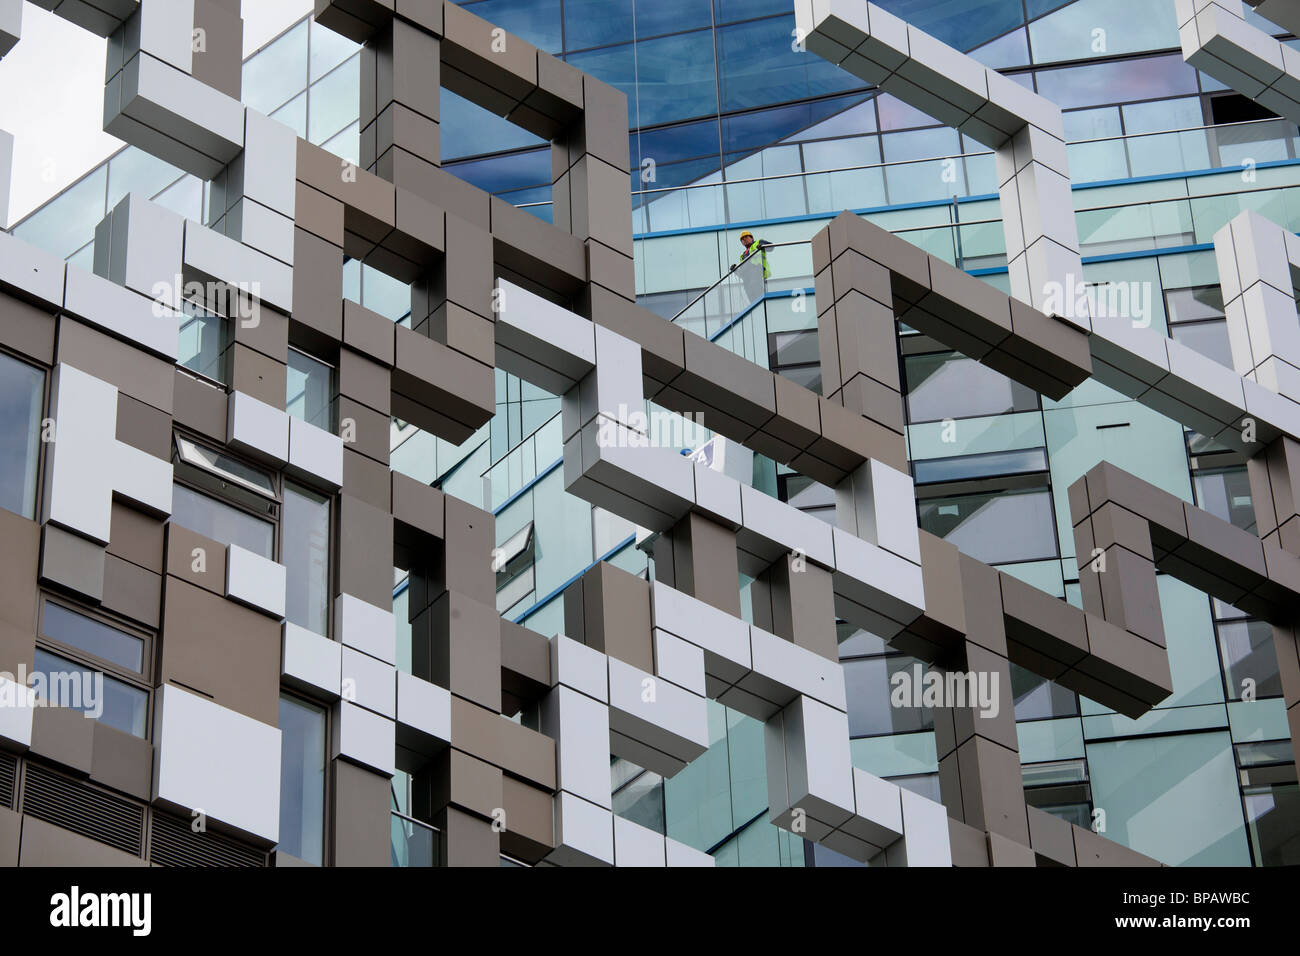 The Cube, Birmingham. An Iconic landmark building housing offices and shops designed by Ken Shuttleworth and opened in 2010. Stock Photo